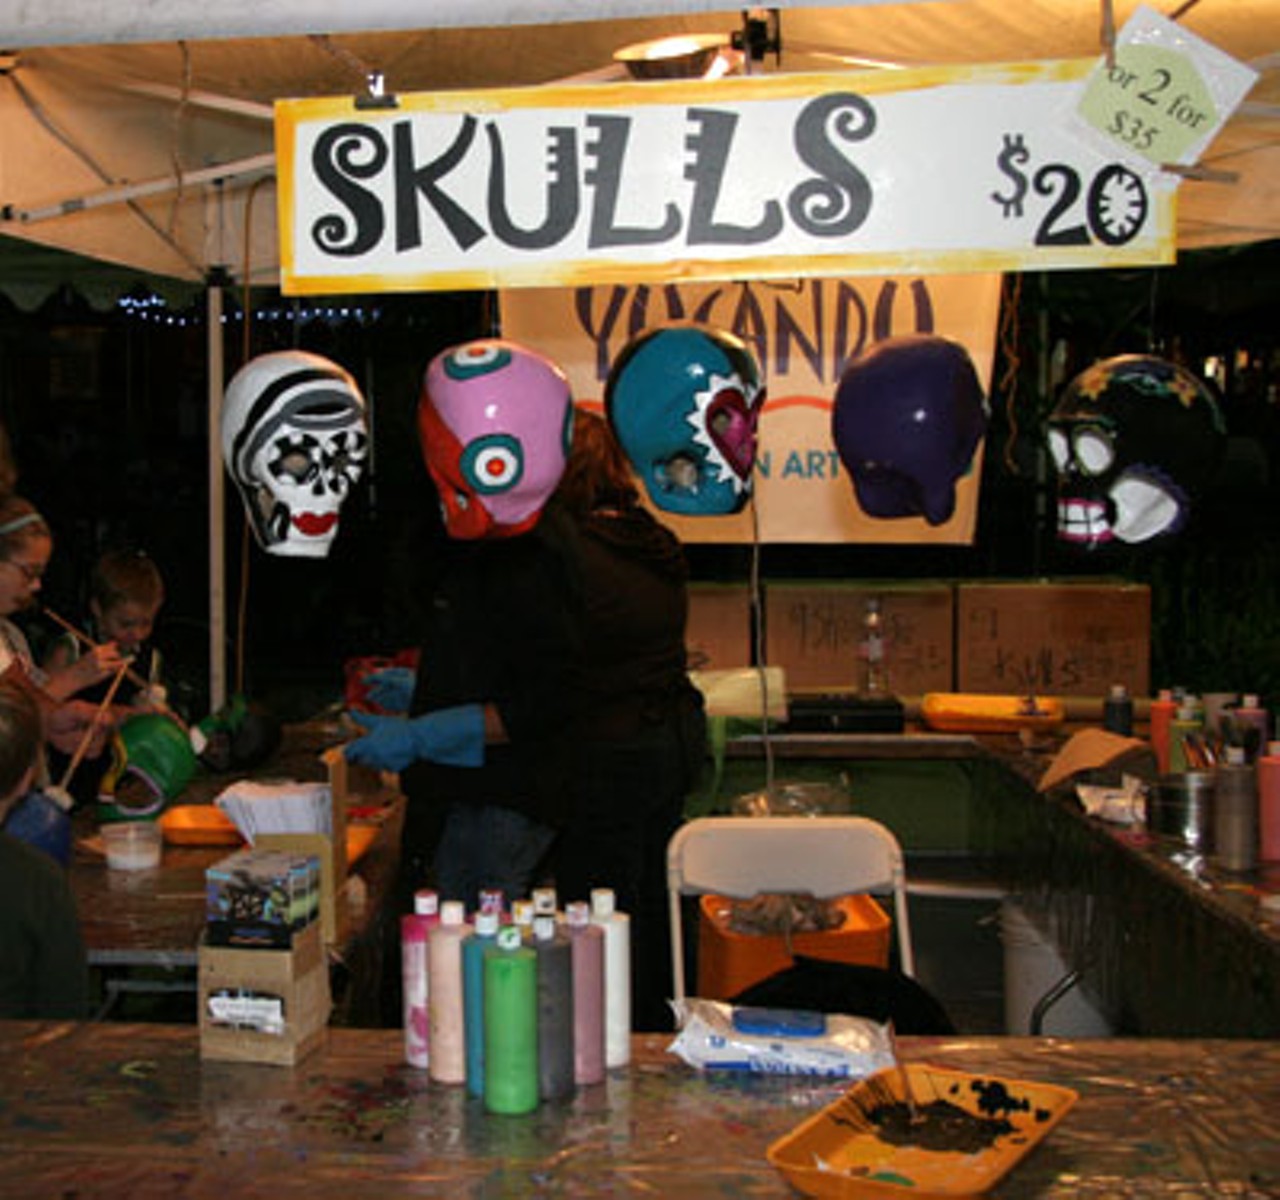 Art Outside offered the chance to paint a Day of the Dead skull for $20.